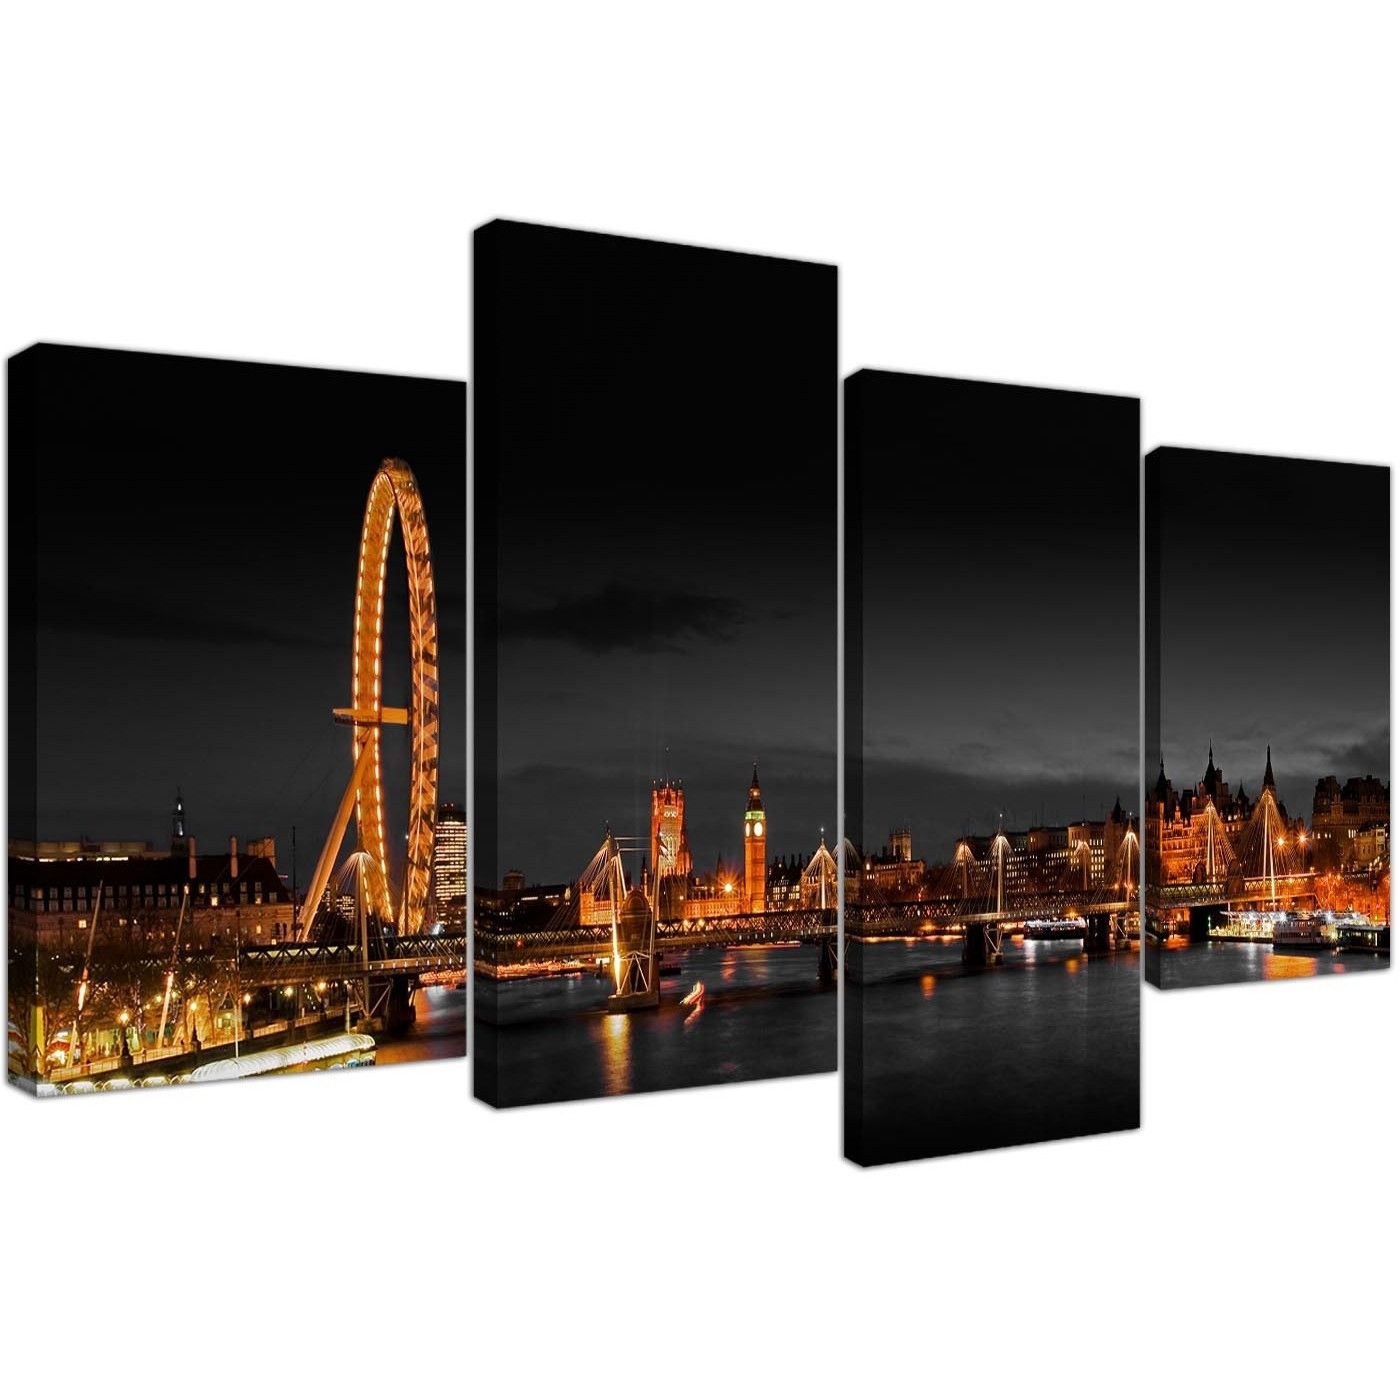 Canvas Wall Art Of Night Time London Eye For Your Office – Set Of 4 For London Wall Art (View 19 of 20)